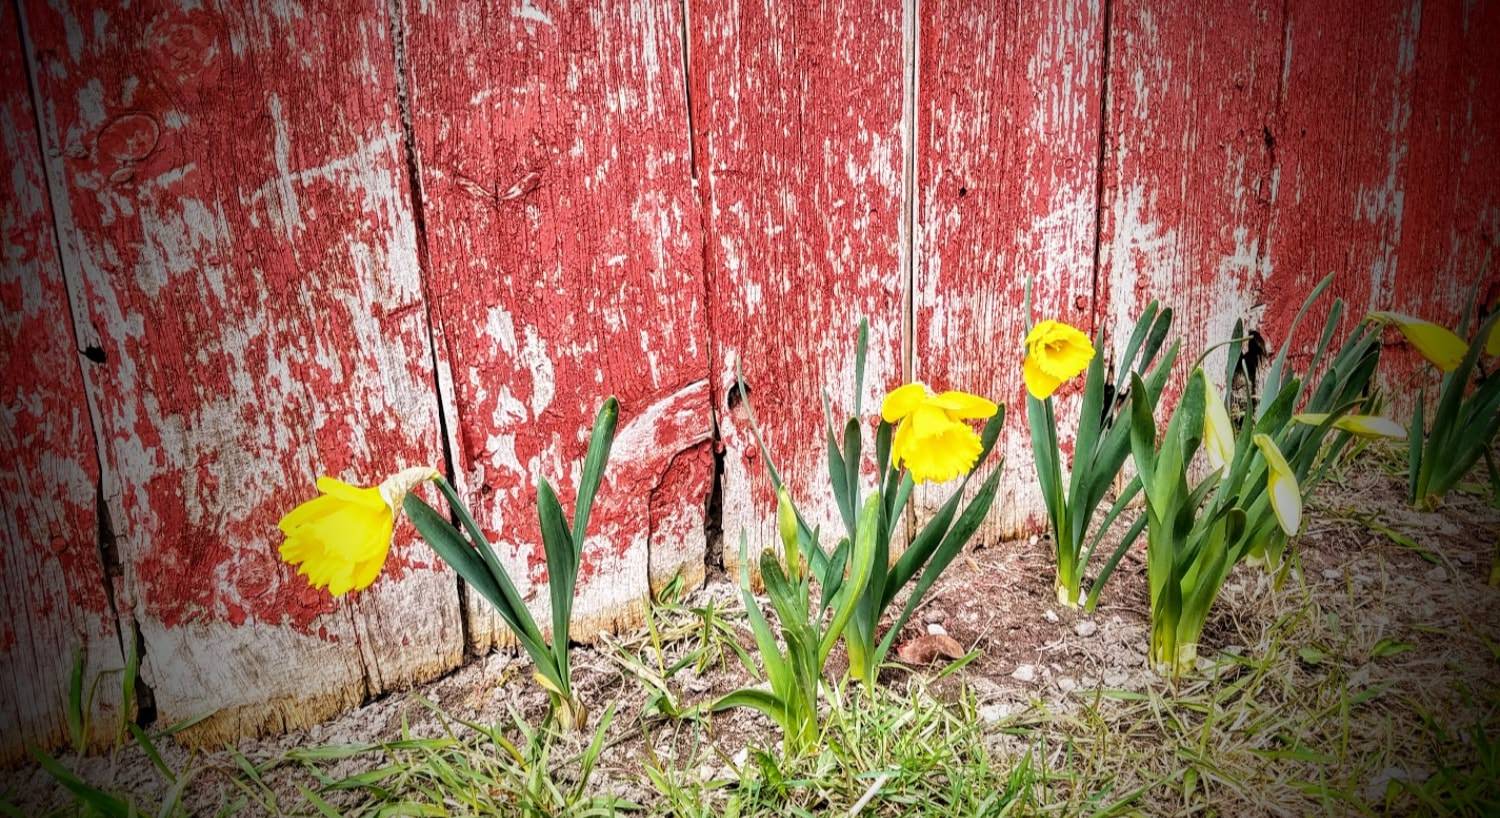 Weathered red fence with yellow daffodils growing in front